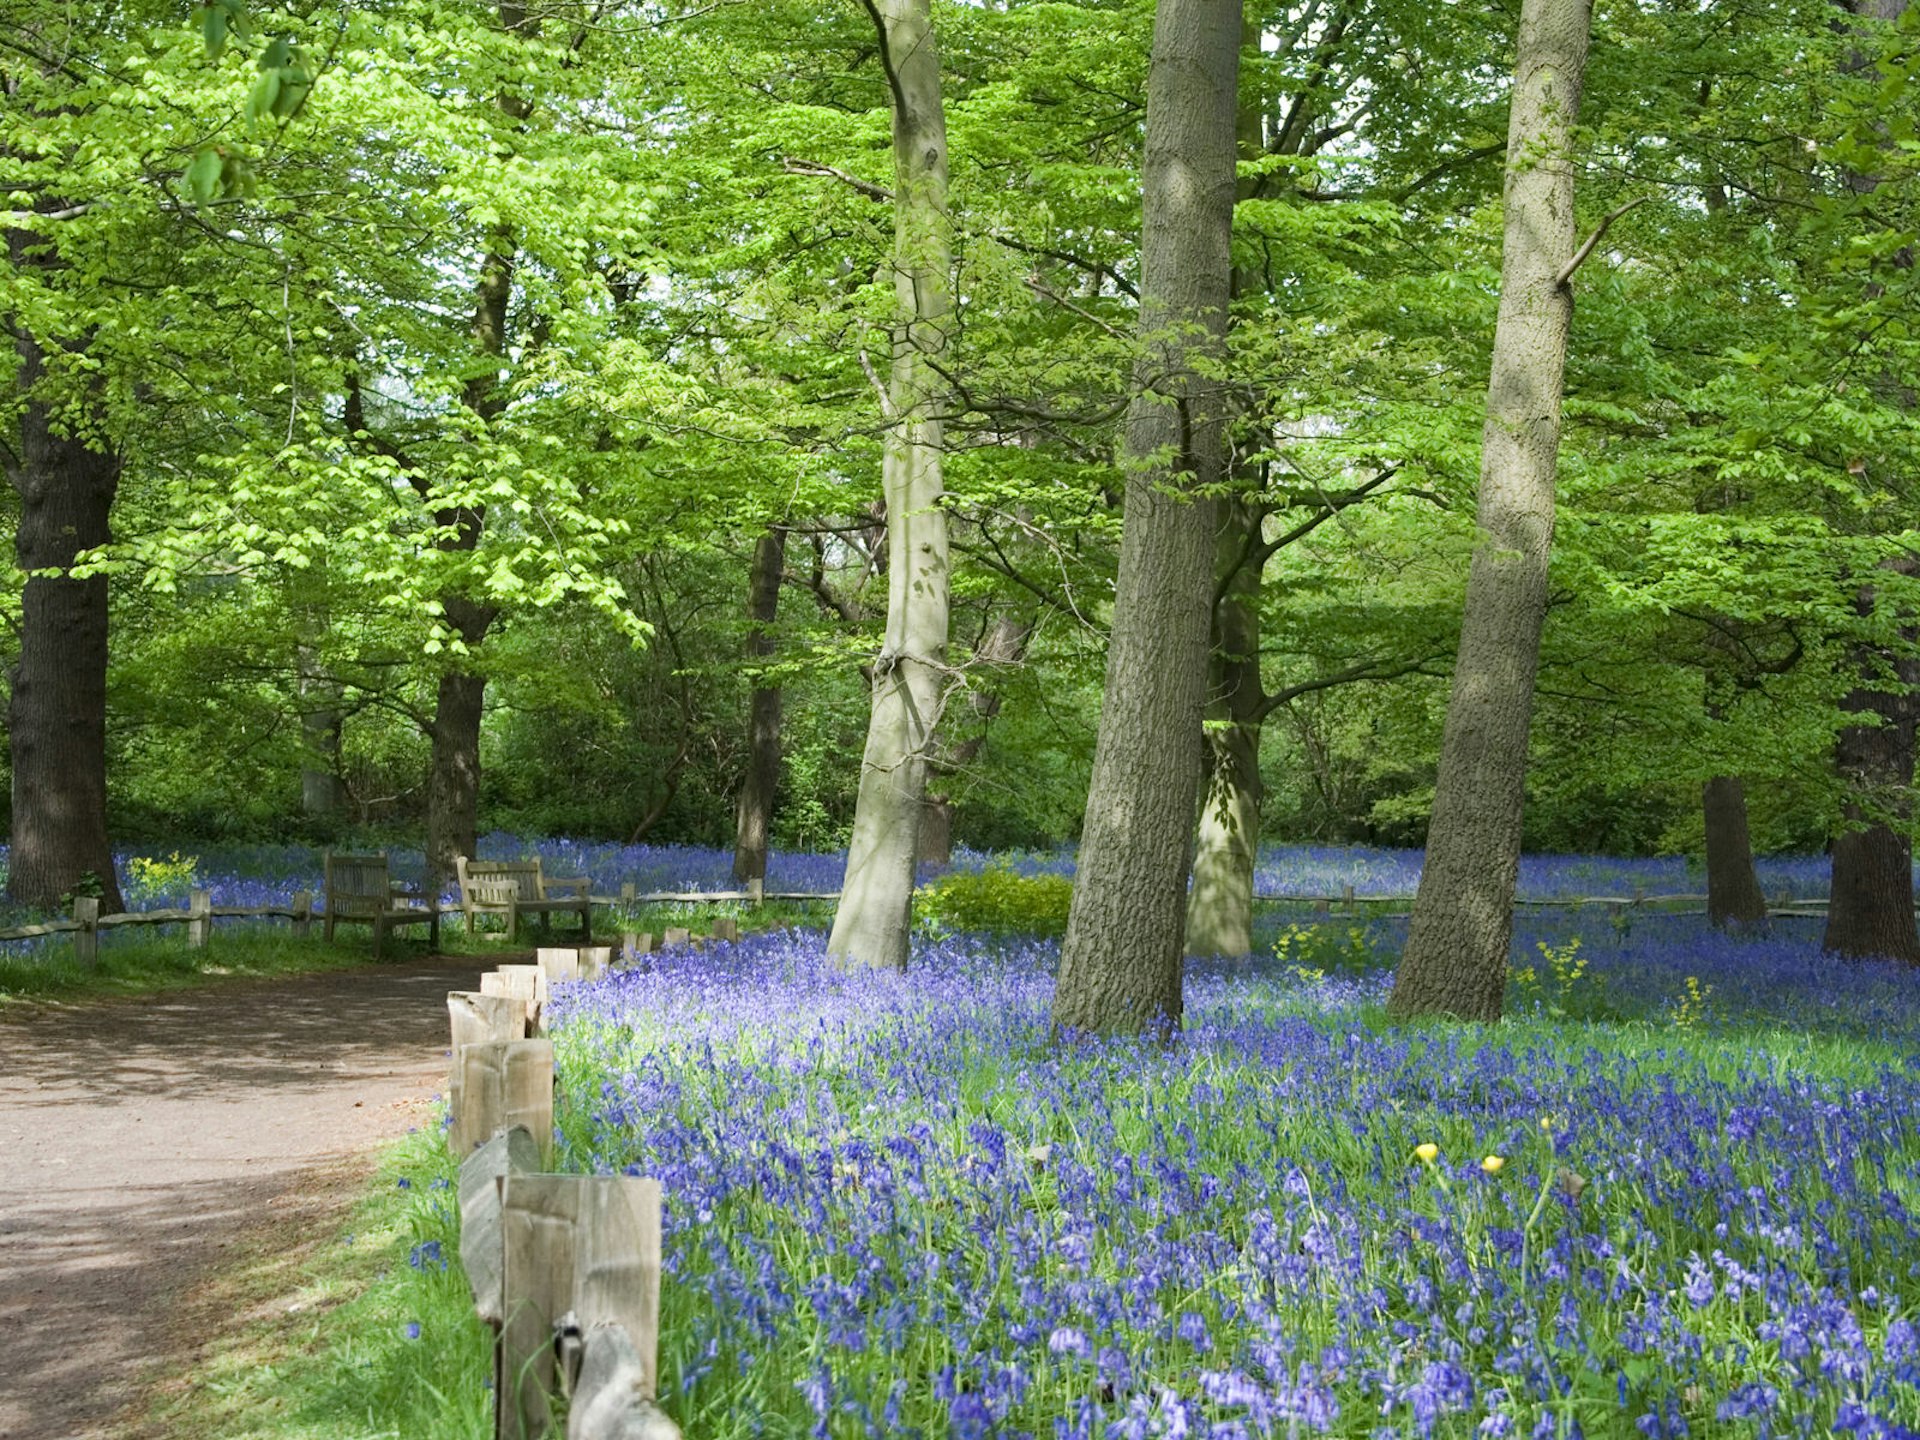 Bluebells lining a path at Kew Gardens.